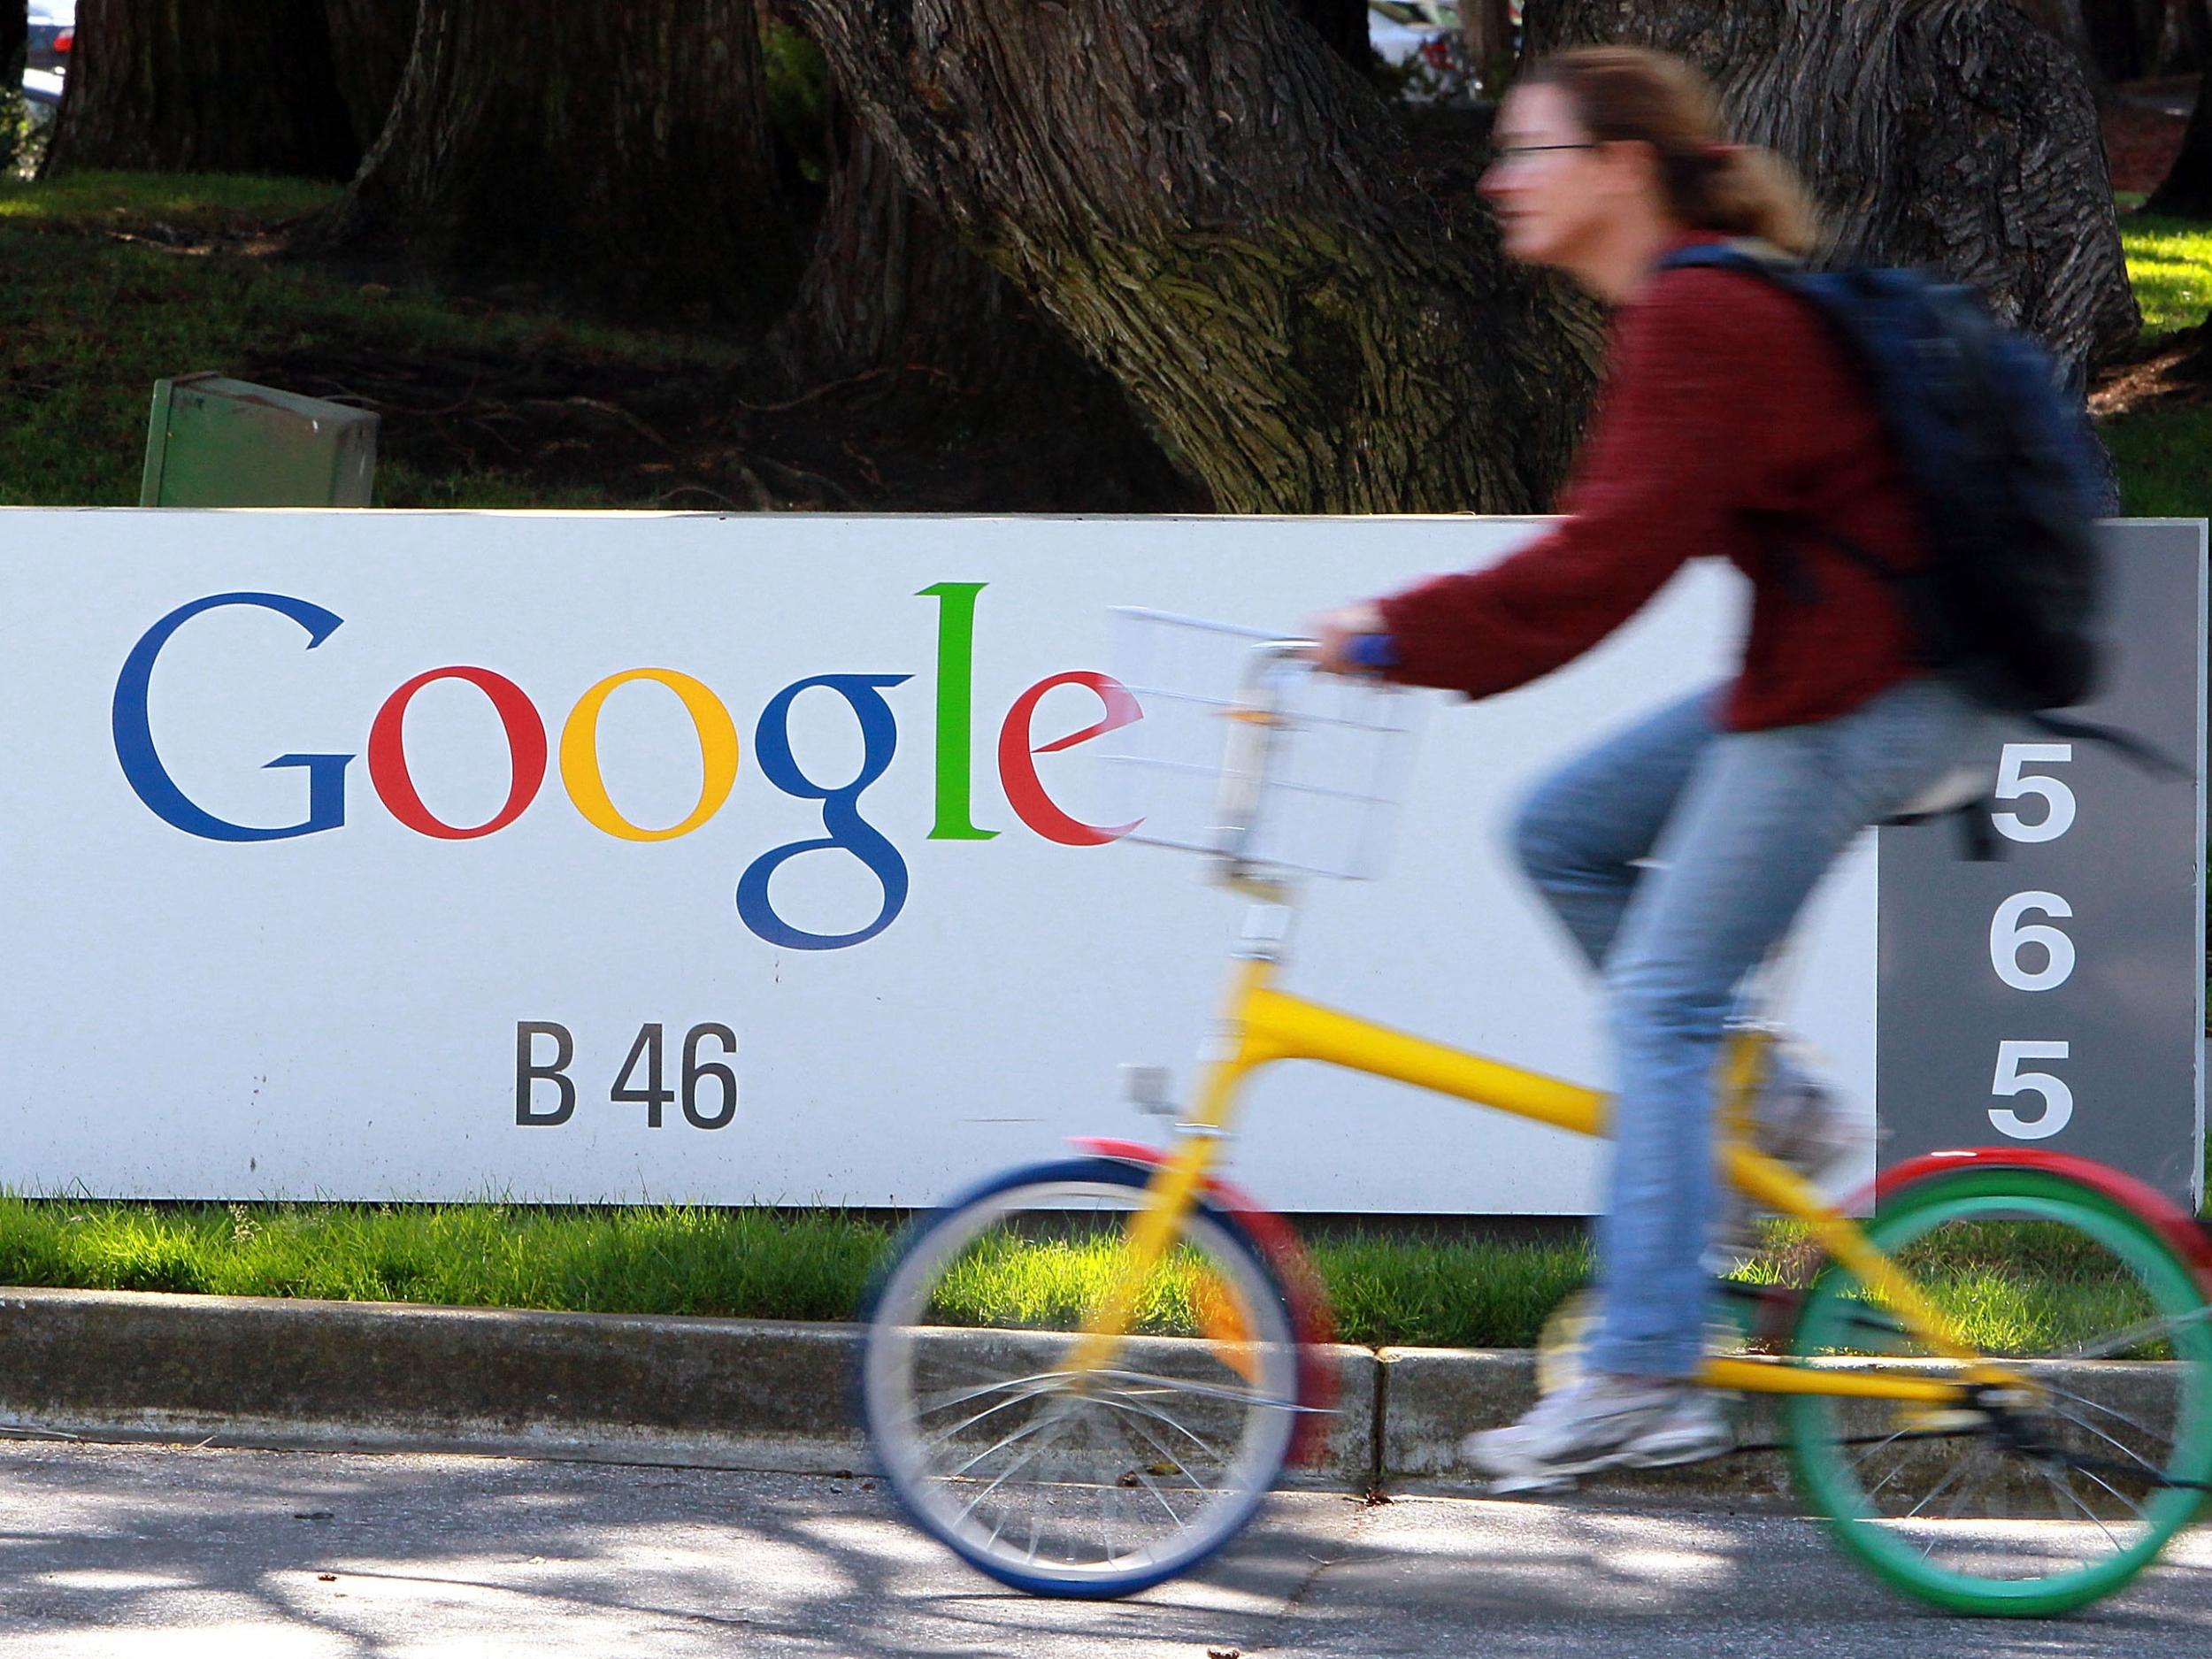 A Google employee rides through the company's headquarters in Mountain View, California in 2010